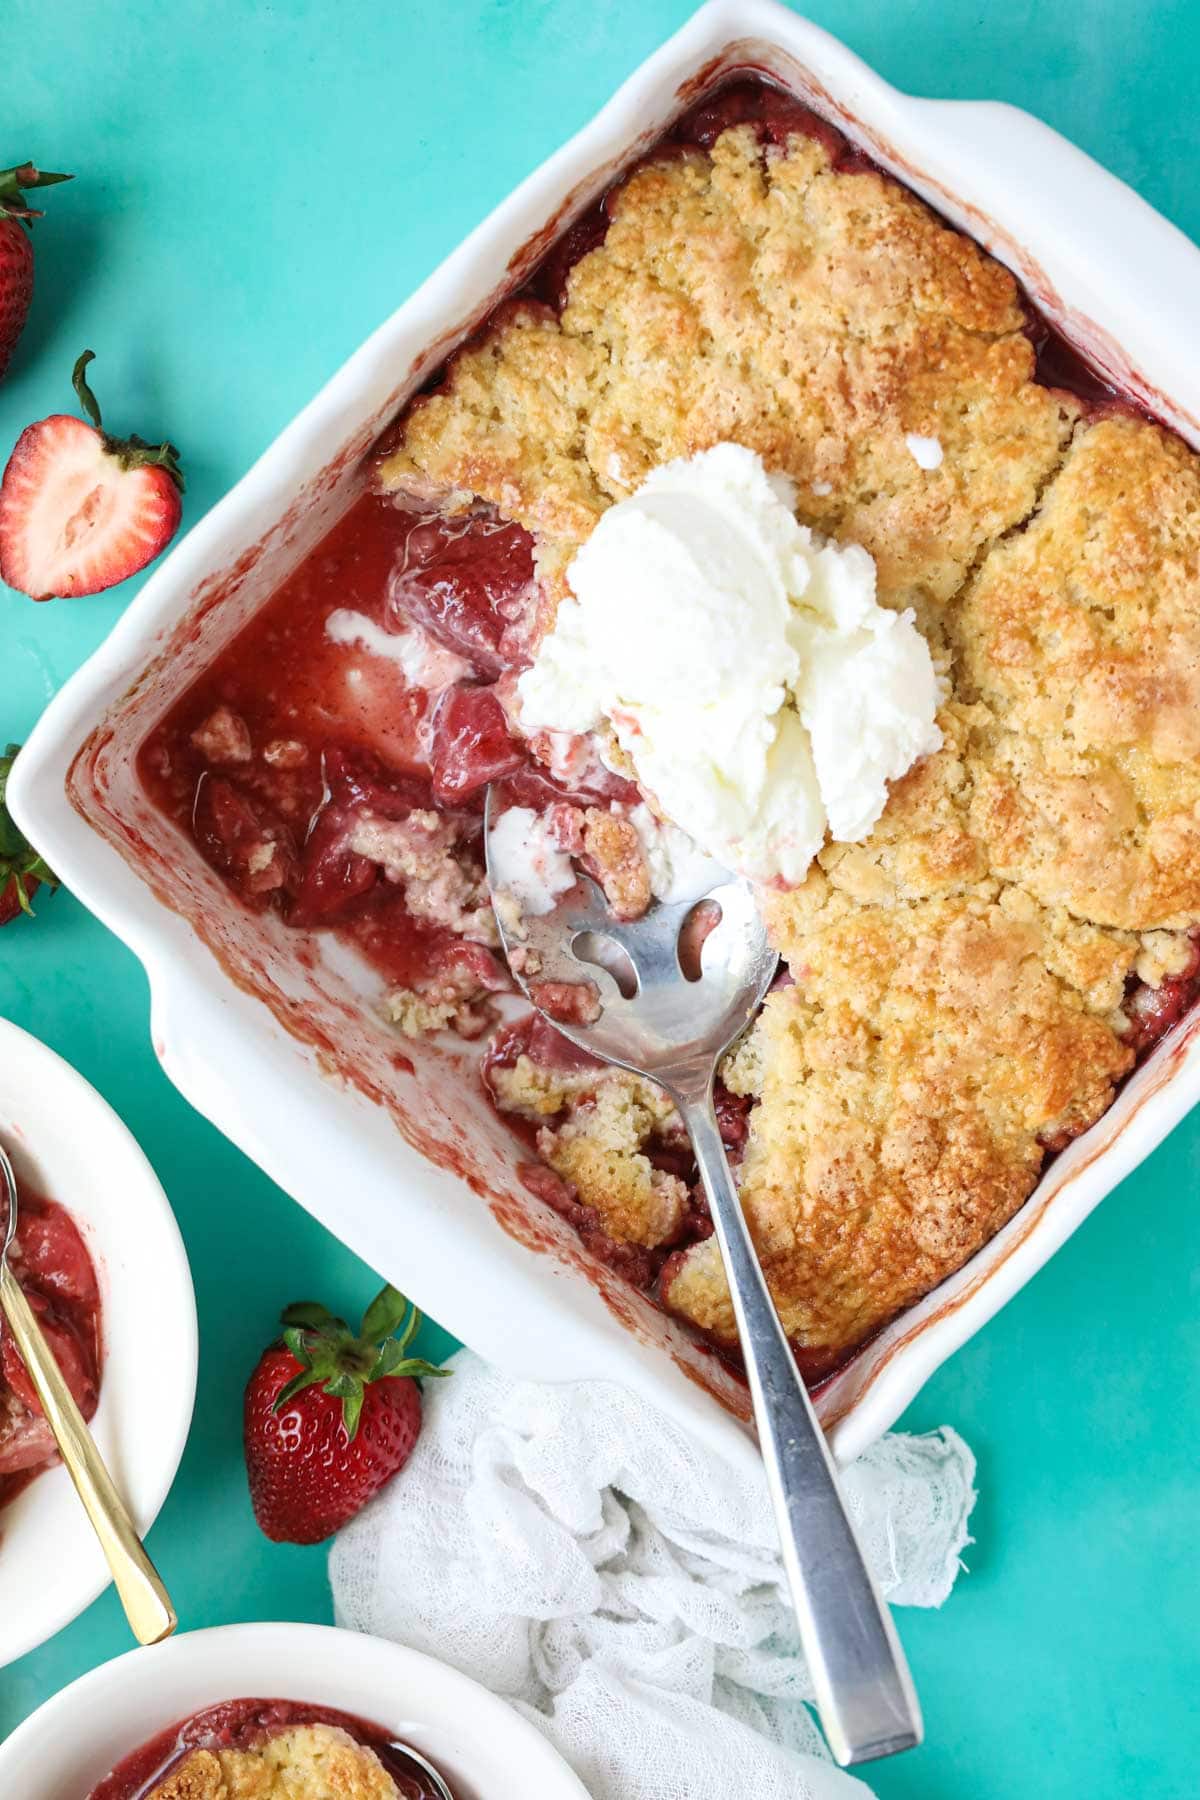 Fresh strawberry cobbler in a white baking dish sitting on a blue surface.